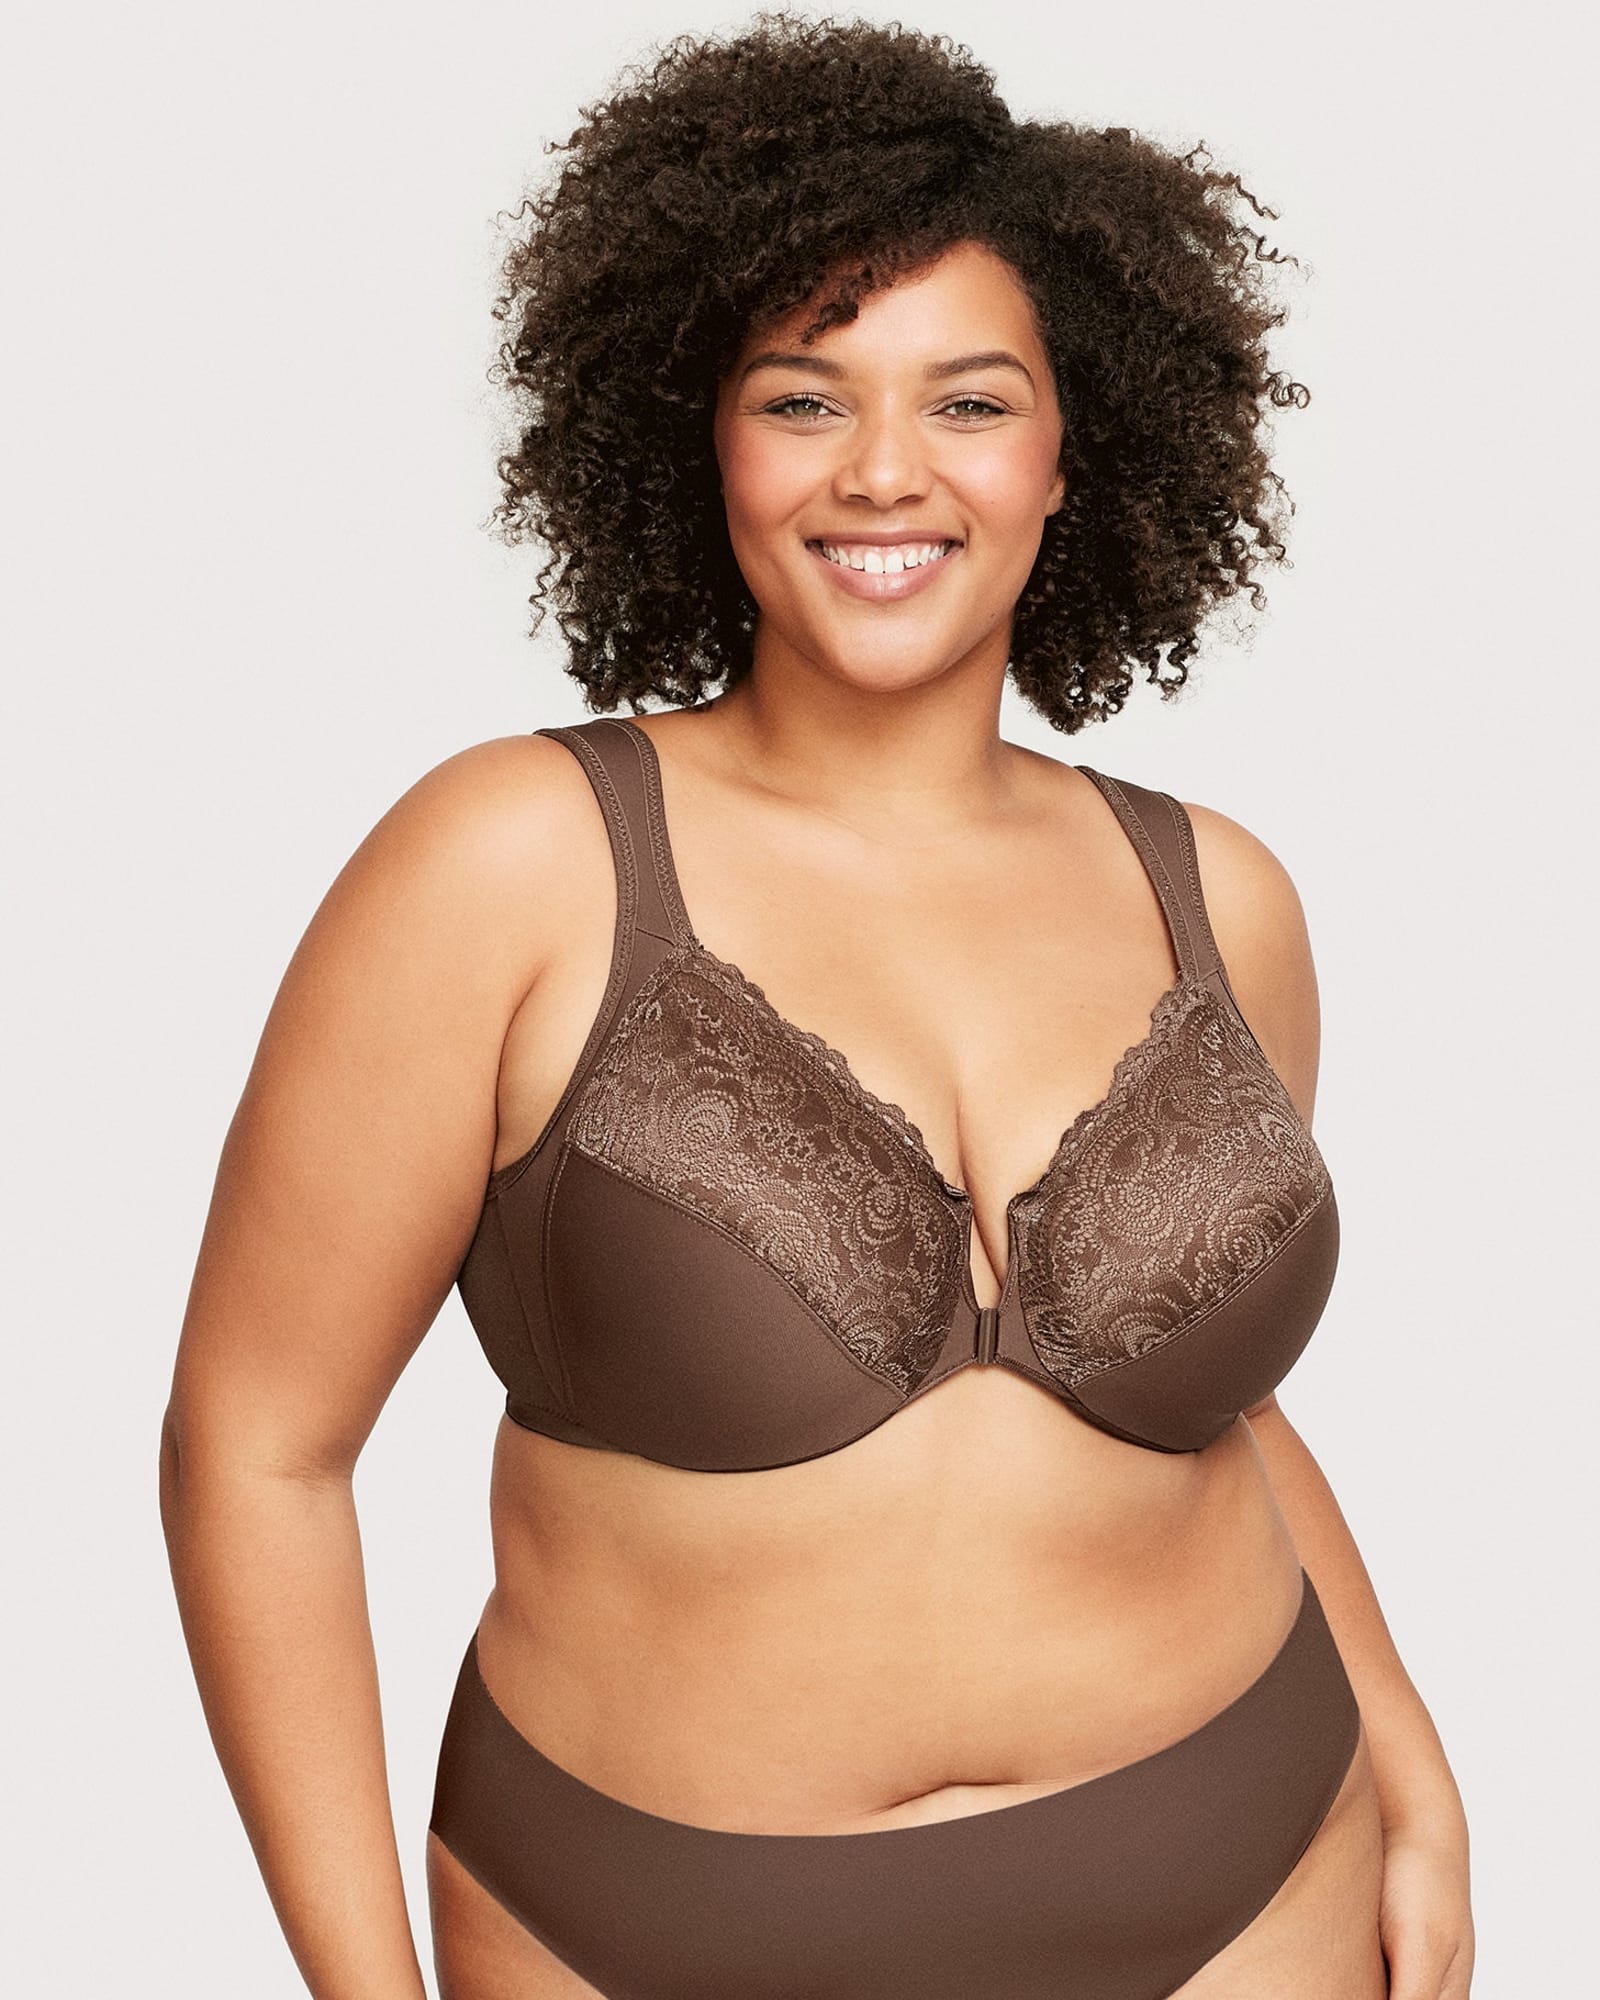 Bras Women Firm Support Wirefree Bra Full Figure Plus Size Soft D/DD/F  US429 From Maoxuewang, $29.07